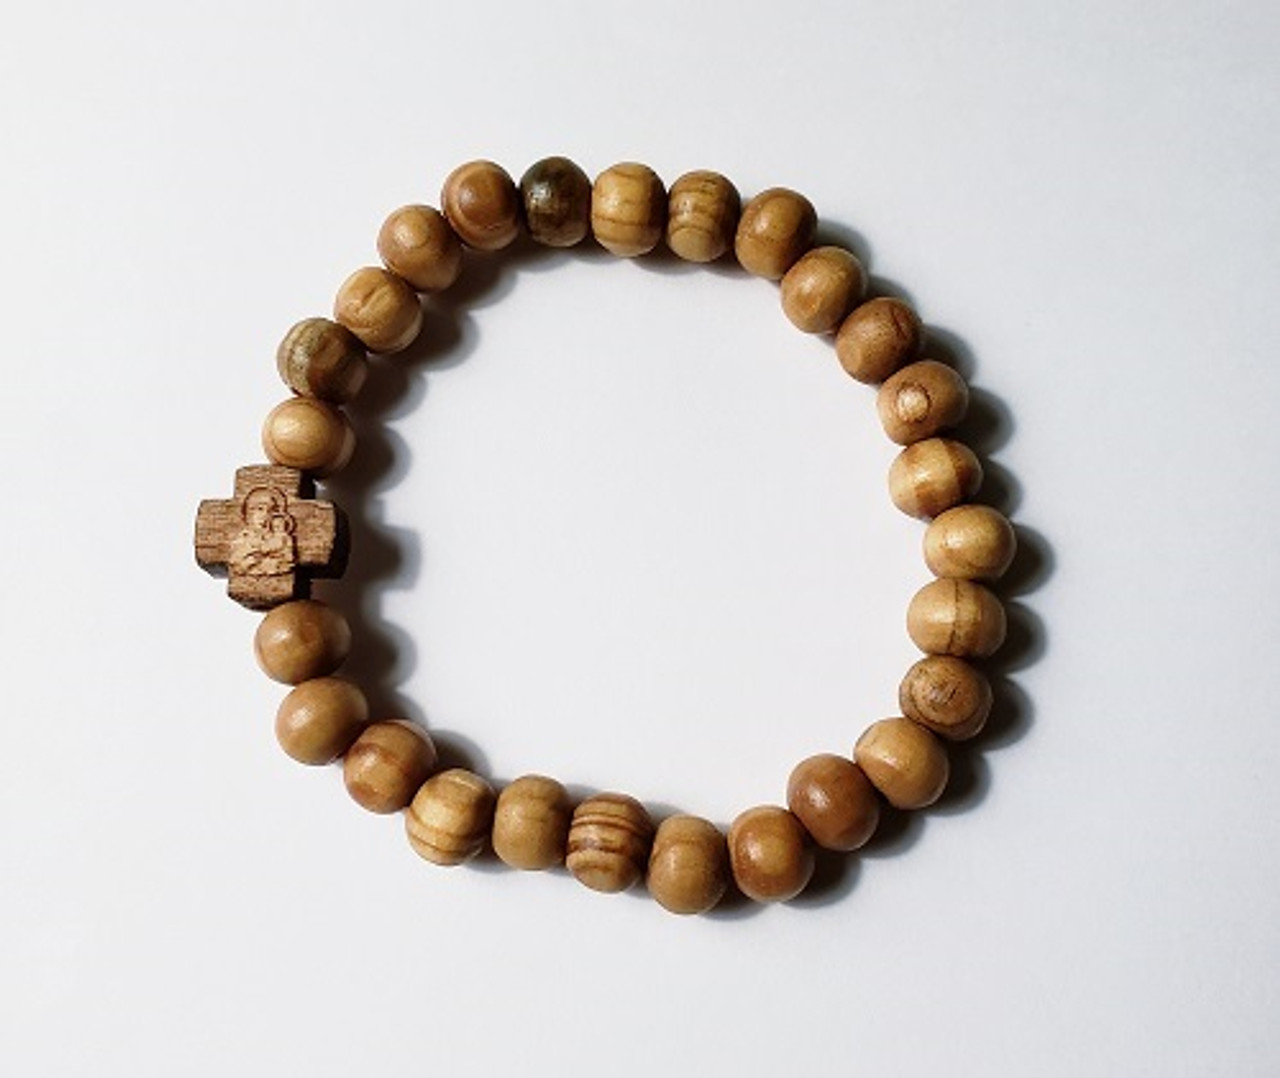 Prayer Bracelet with olive wood beads, wooden cross